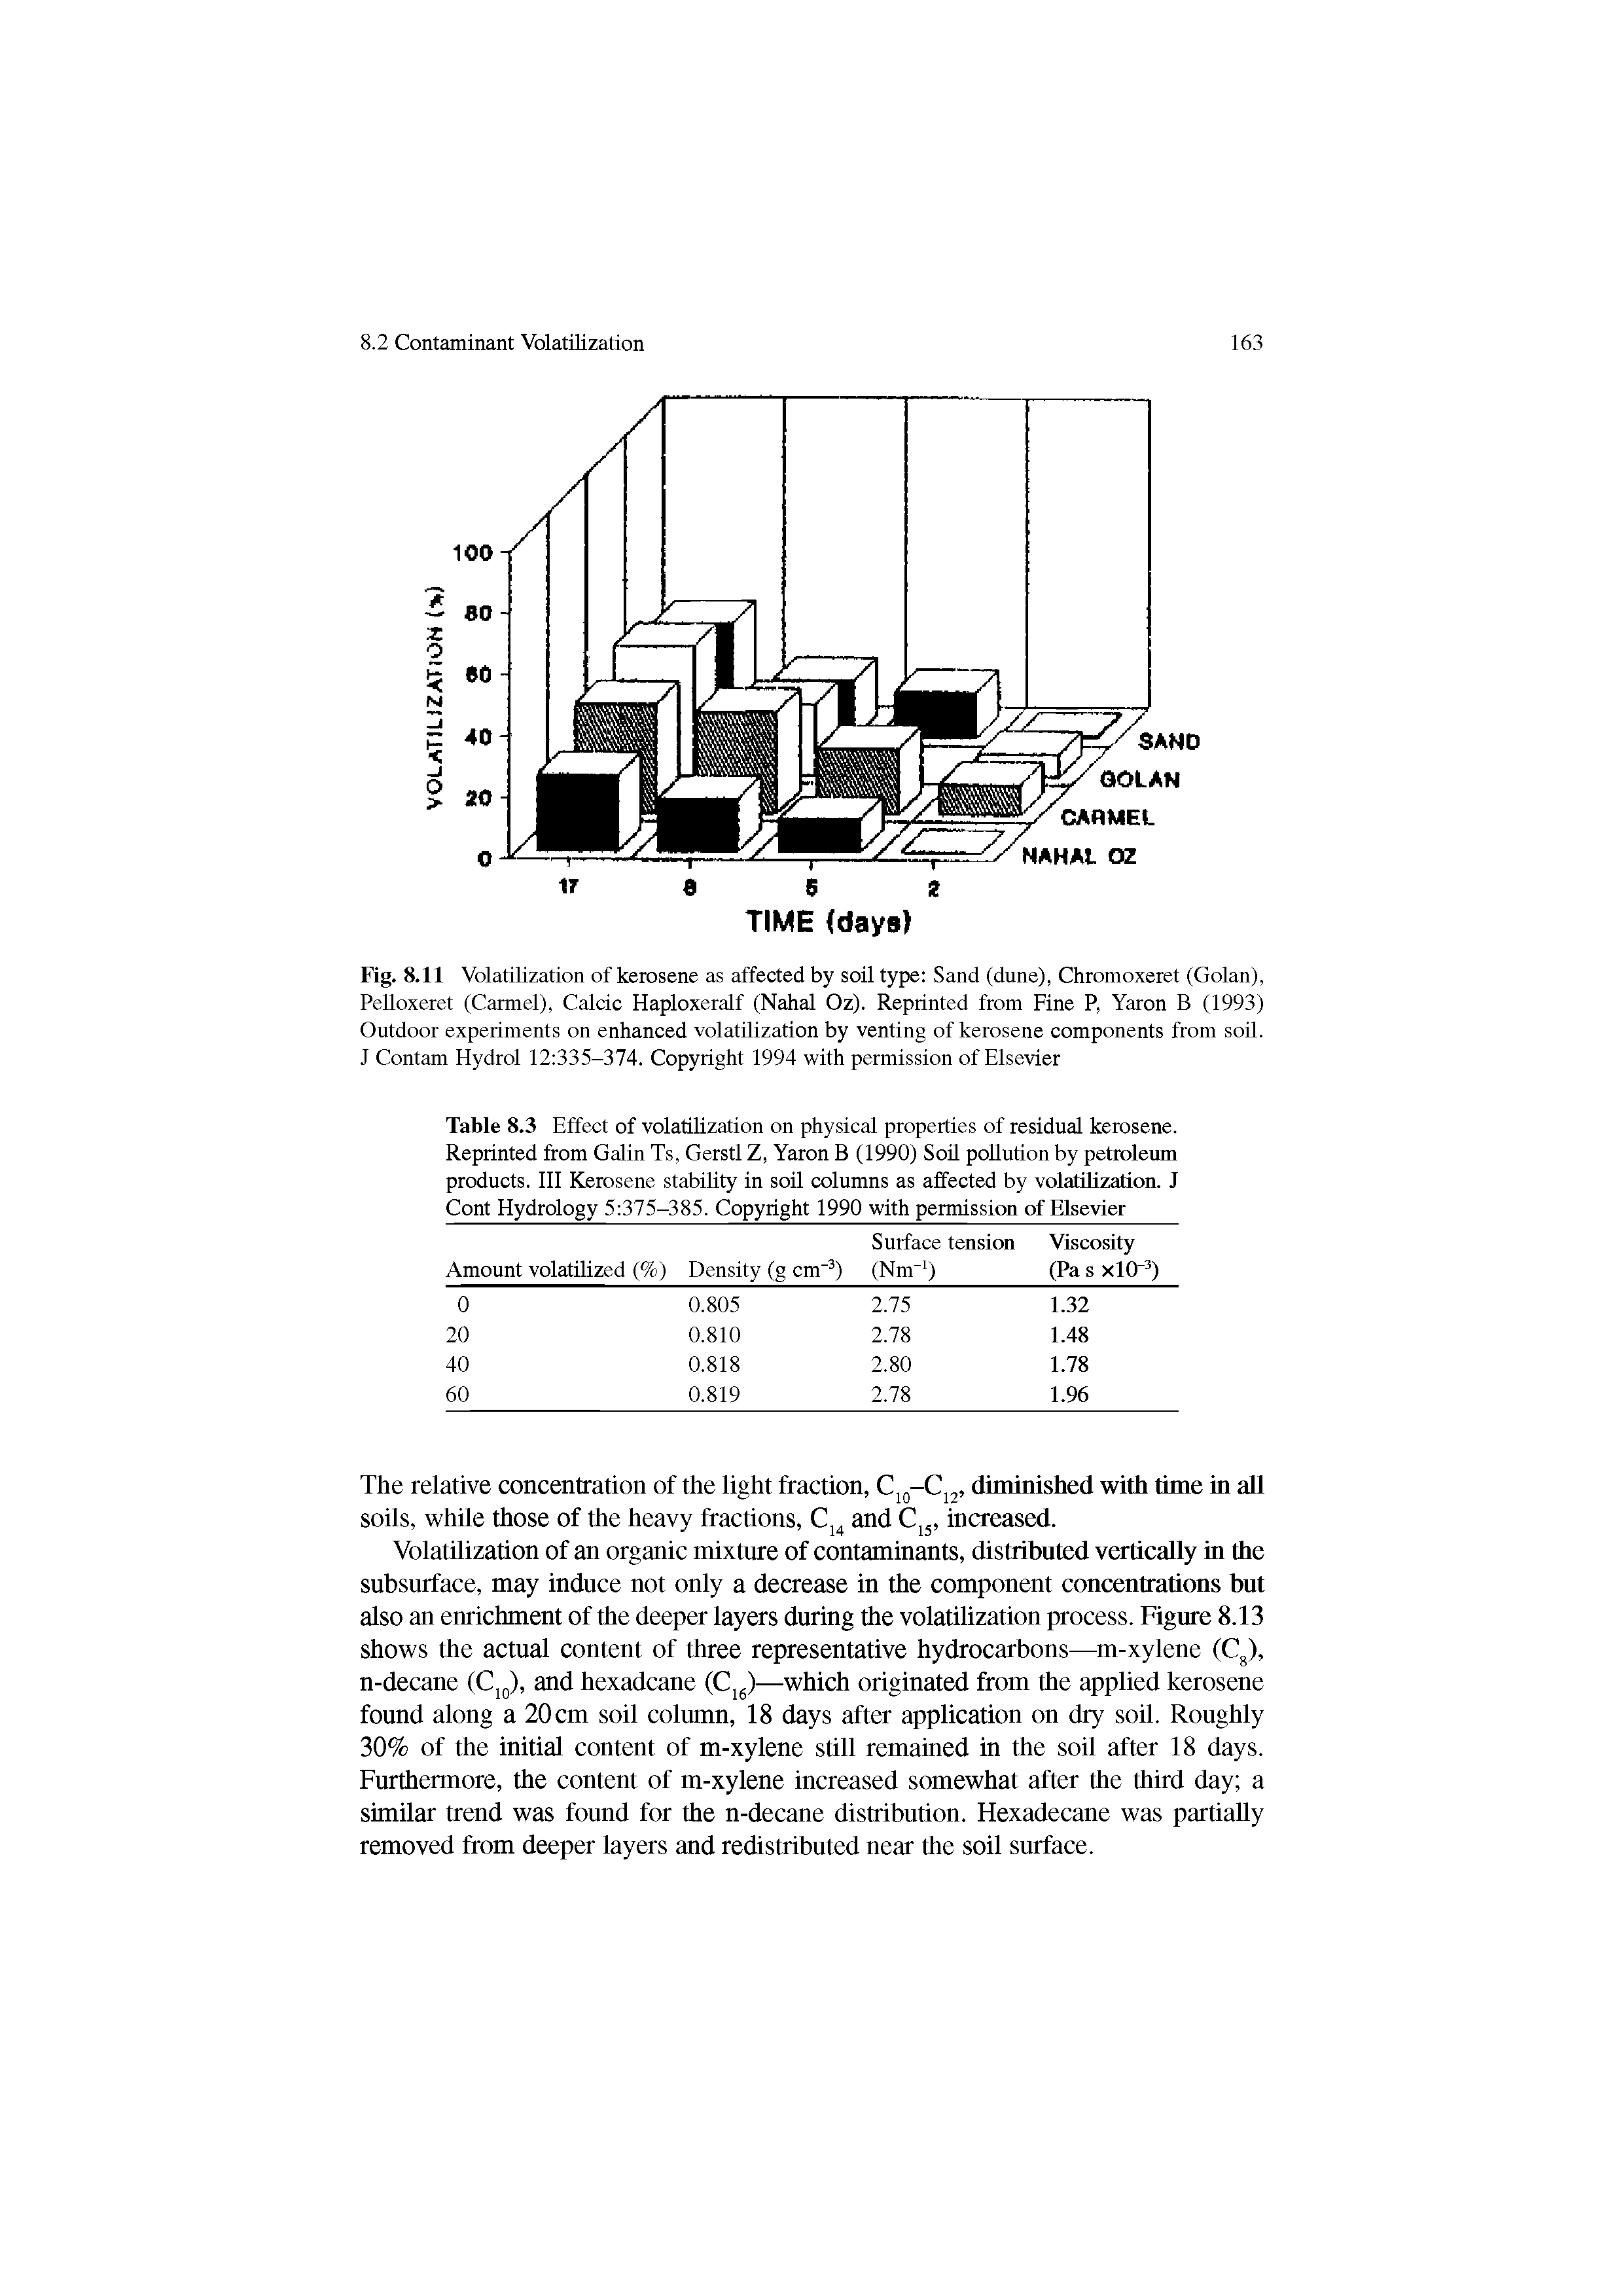 Table 8.3 Effect of volatilization on physical properties of residual kerosene. Reprinted from Galin Ts, Gerstl Z, Yaron B (1990) Soil pollution by petroleum products. Ill Kerosene stability in soil columns as affected by volatilization. J Cont Hydrology 5 375-385. Copyright 1990 with permission of Elsevier...